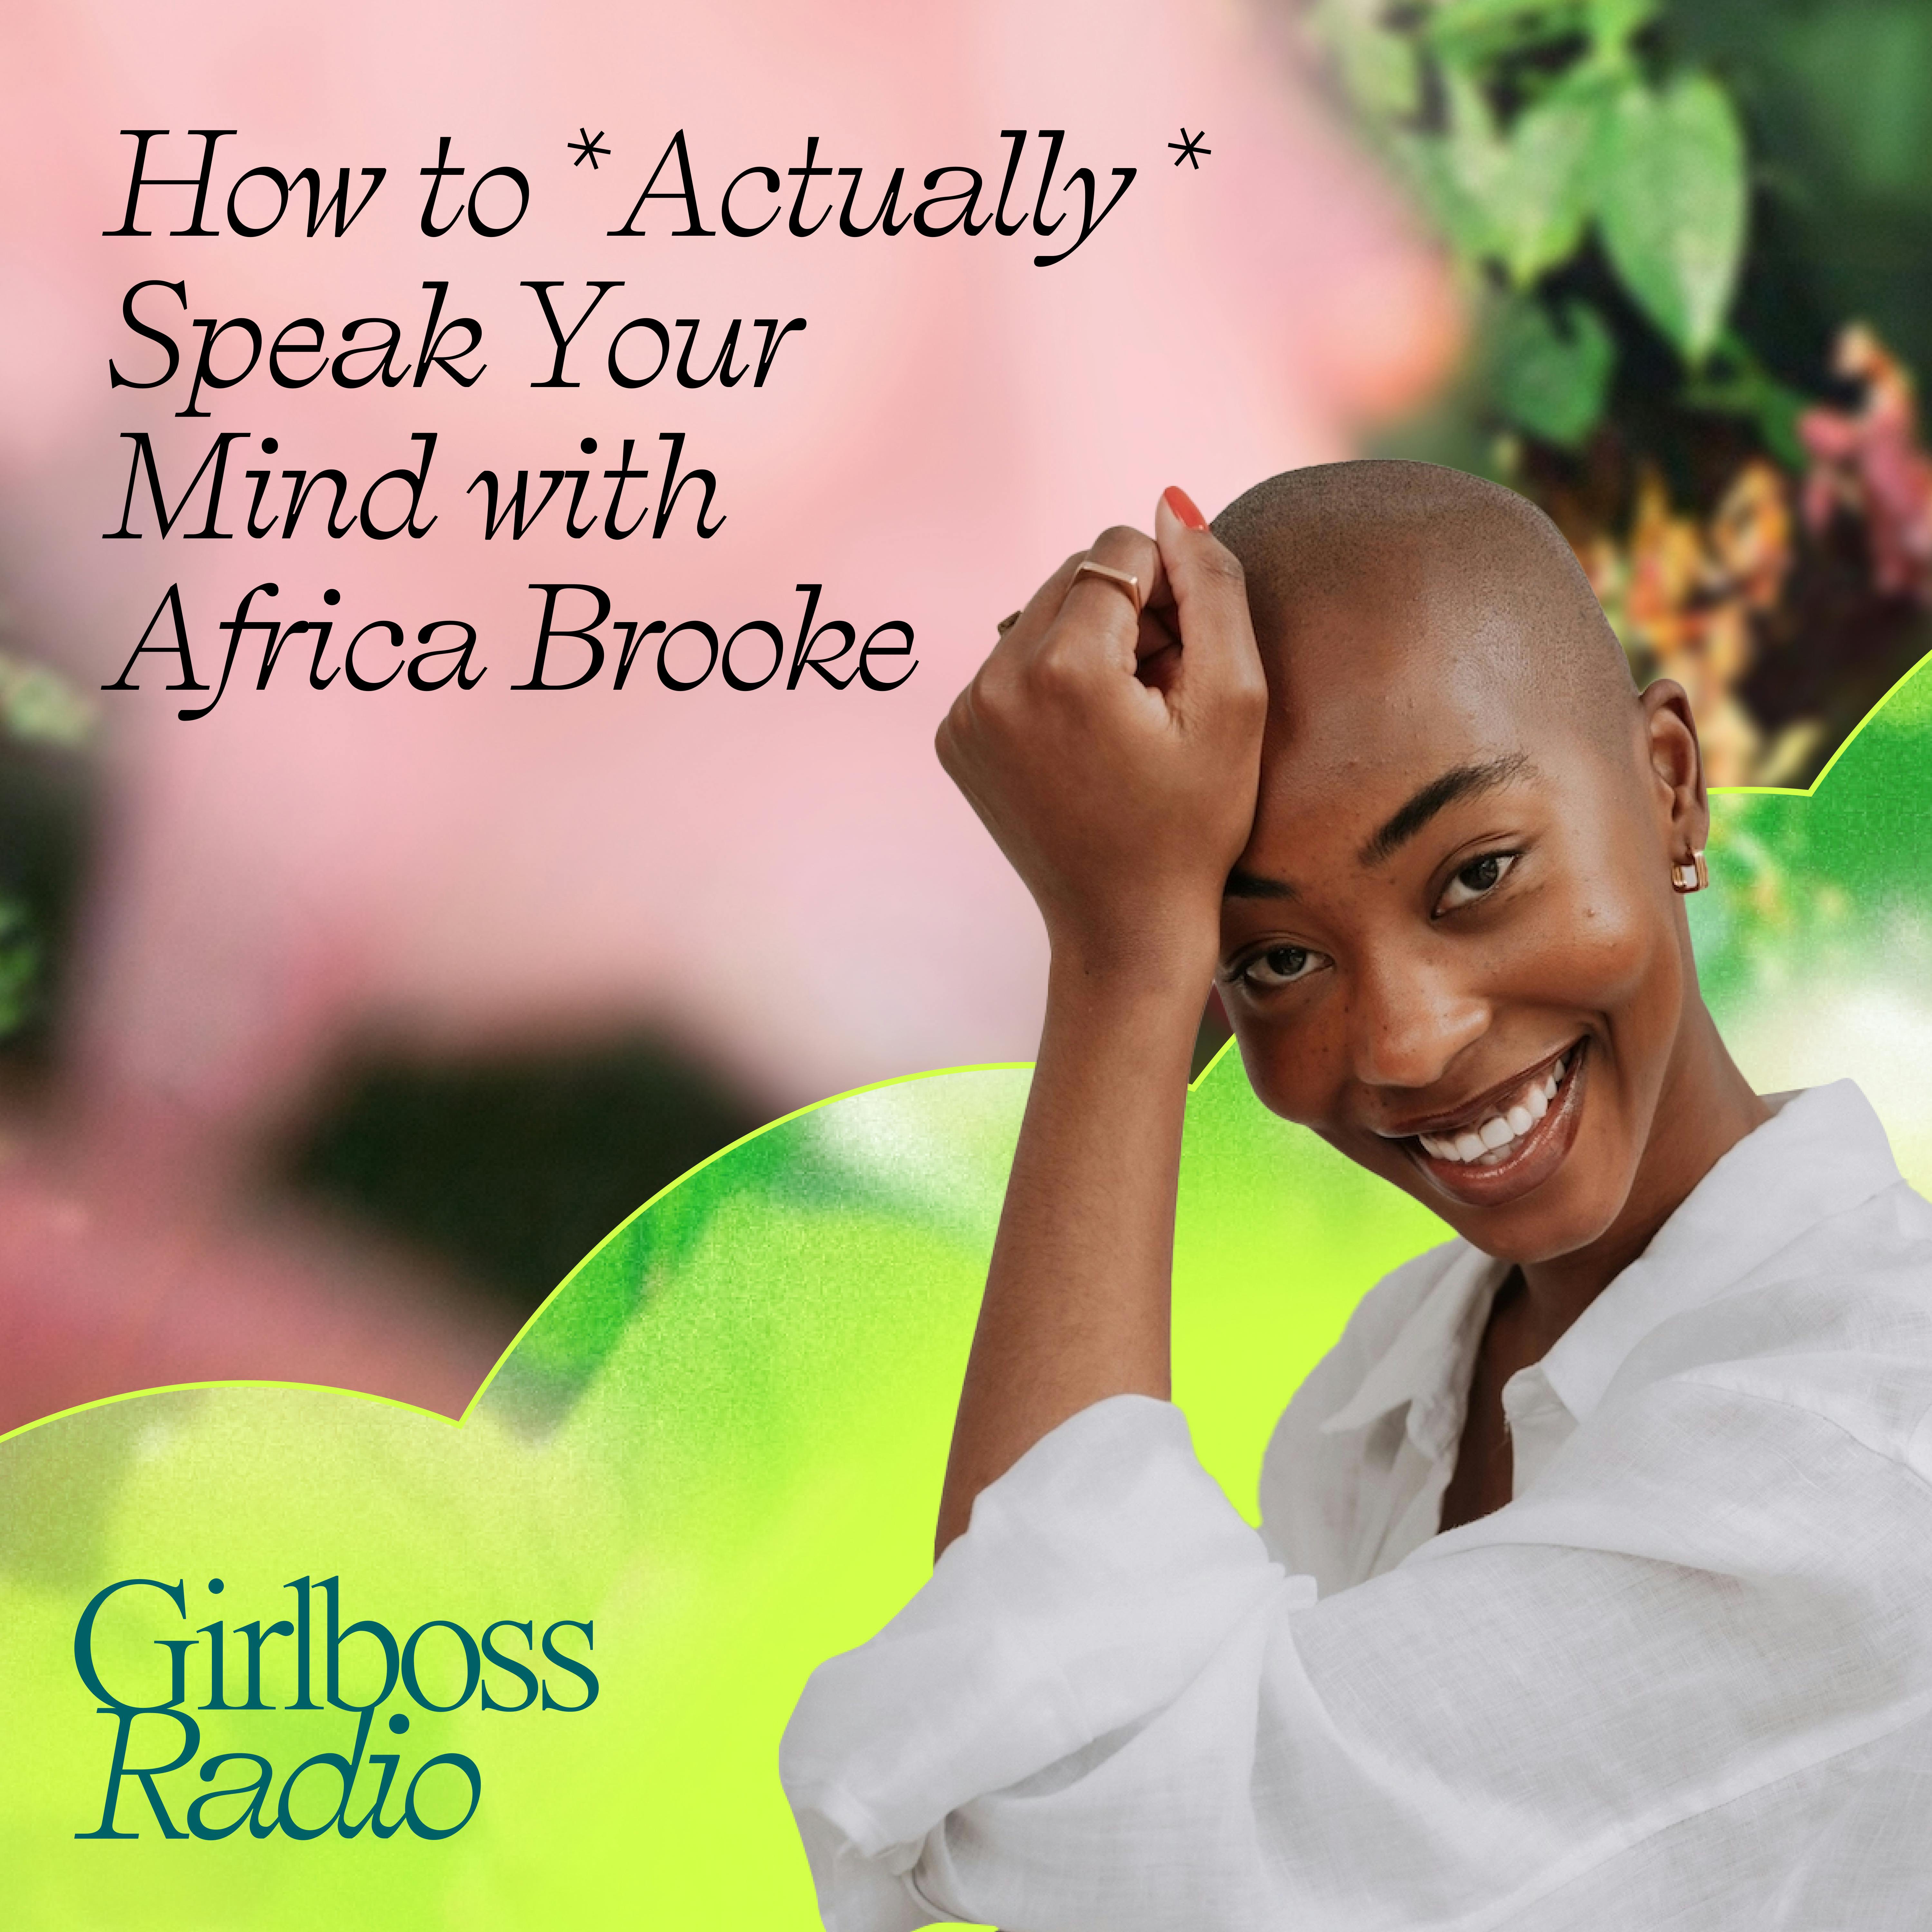 How to *Actually* Speak Your Mind with Africa Brooke